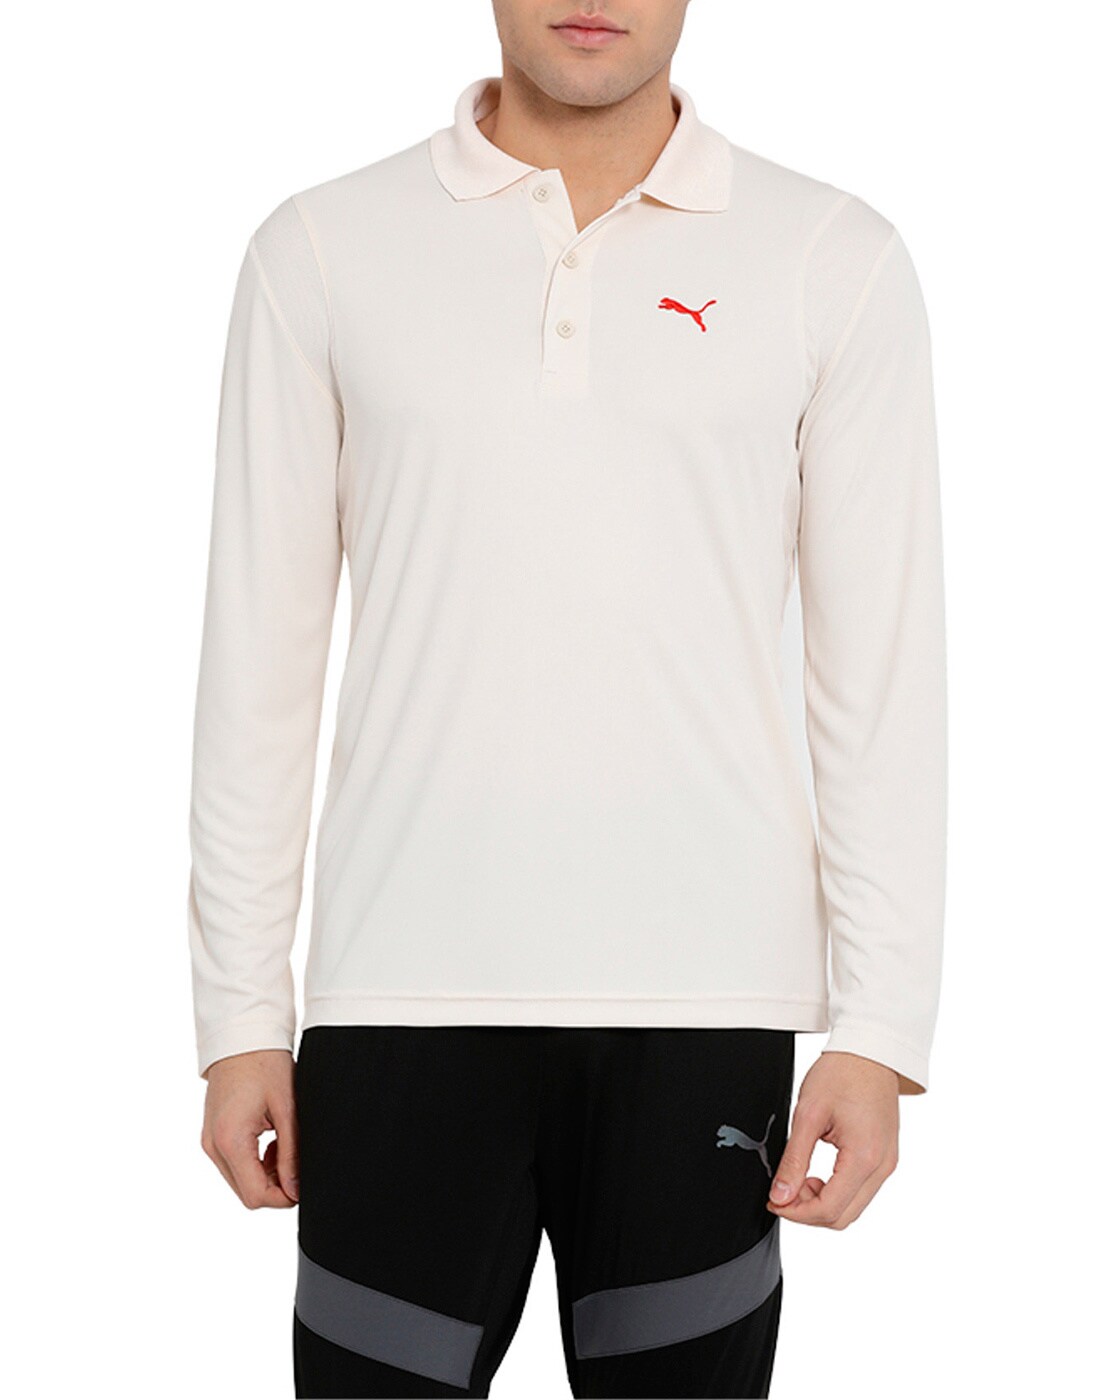 Buy Cricket Clothes For Men At Best Prices Up to 50 Off  PUMA